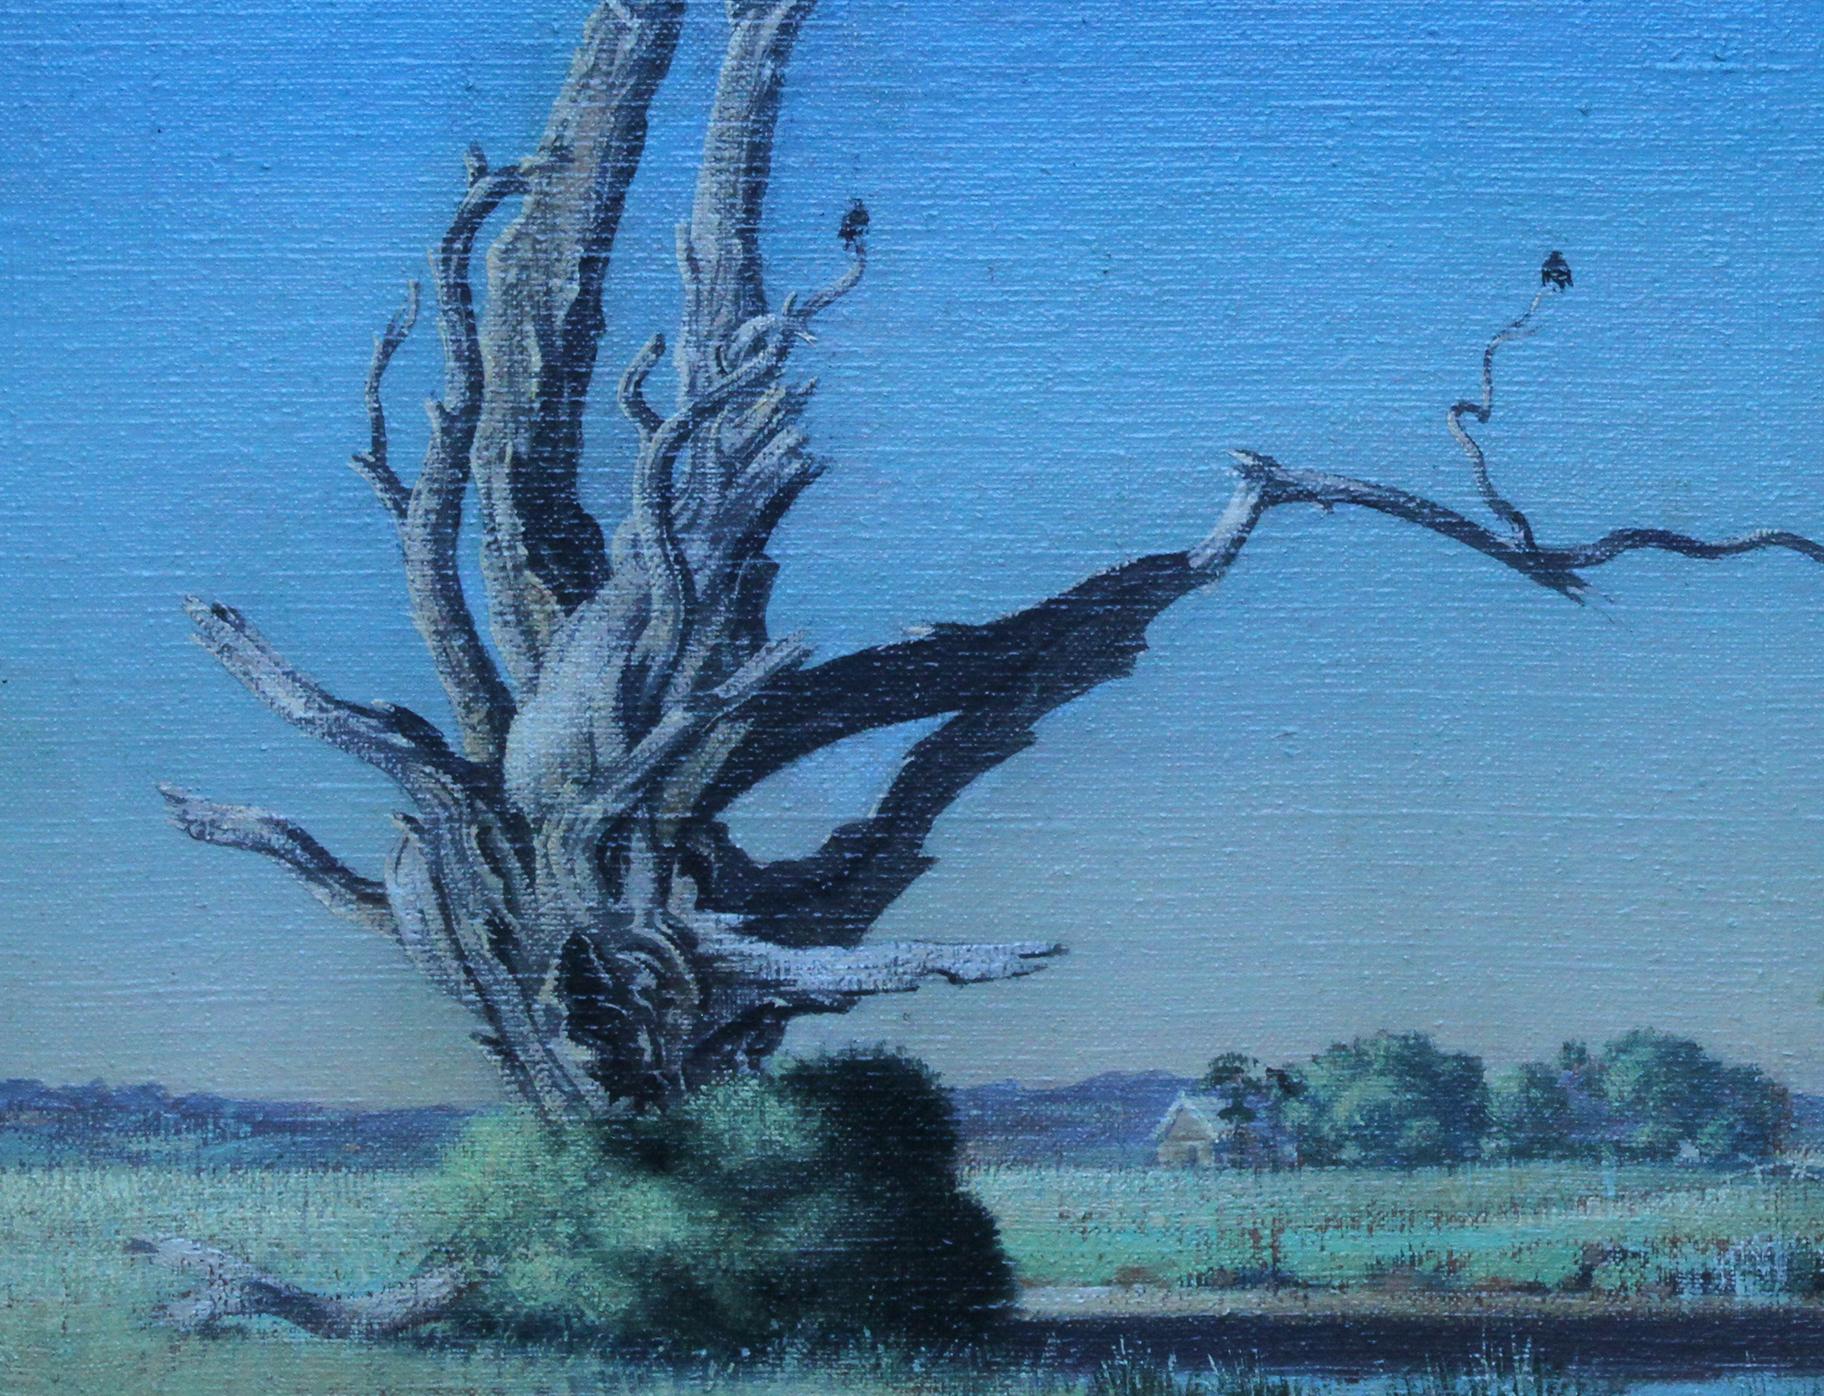 painted dead trees